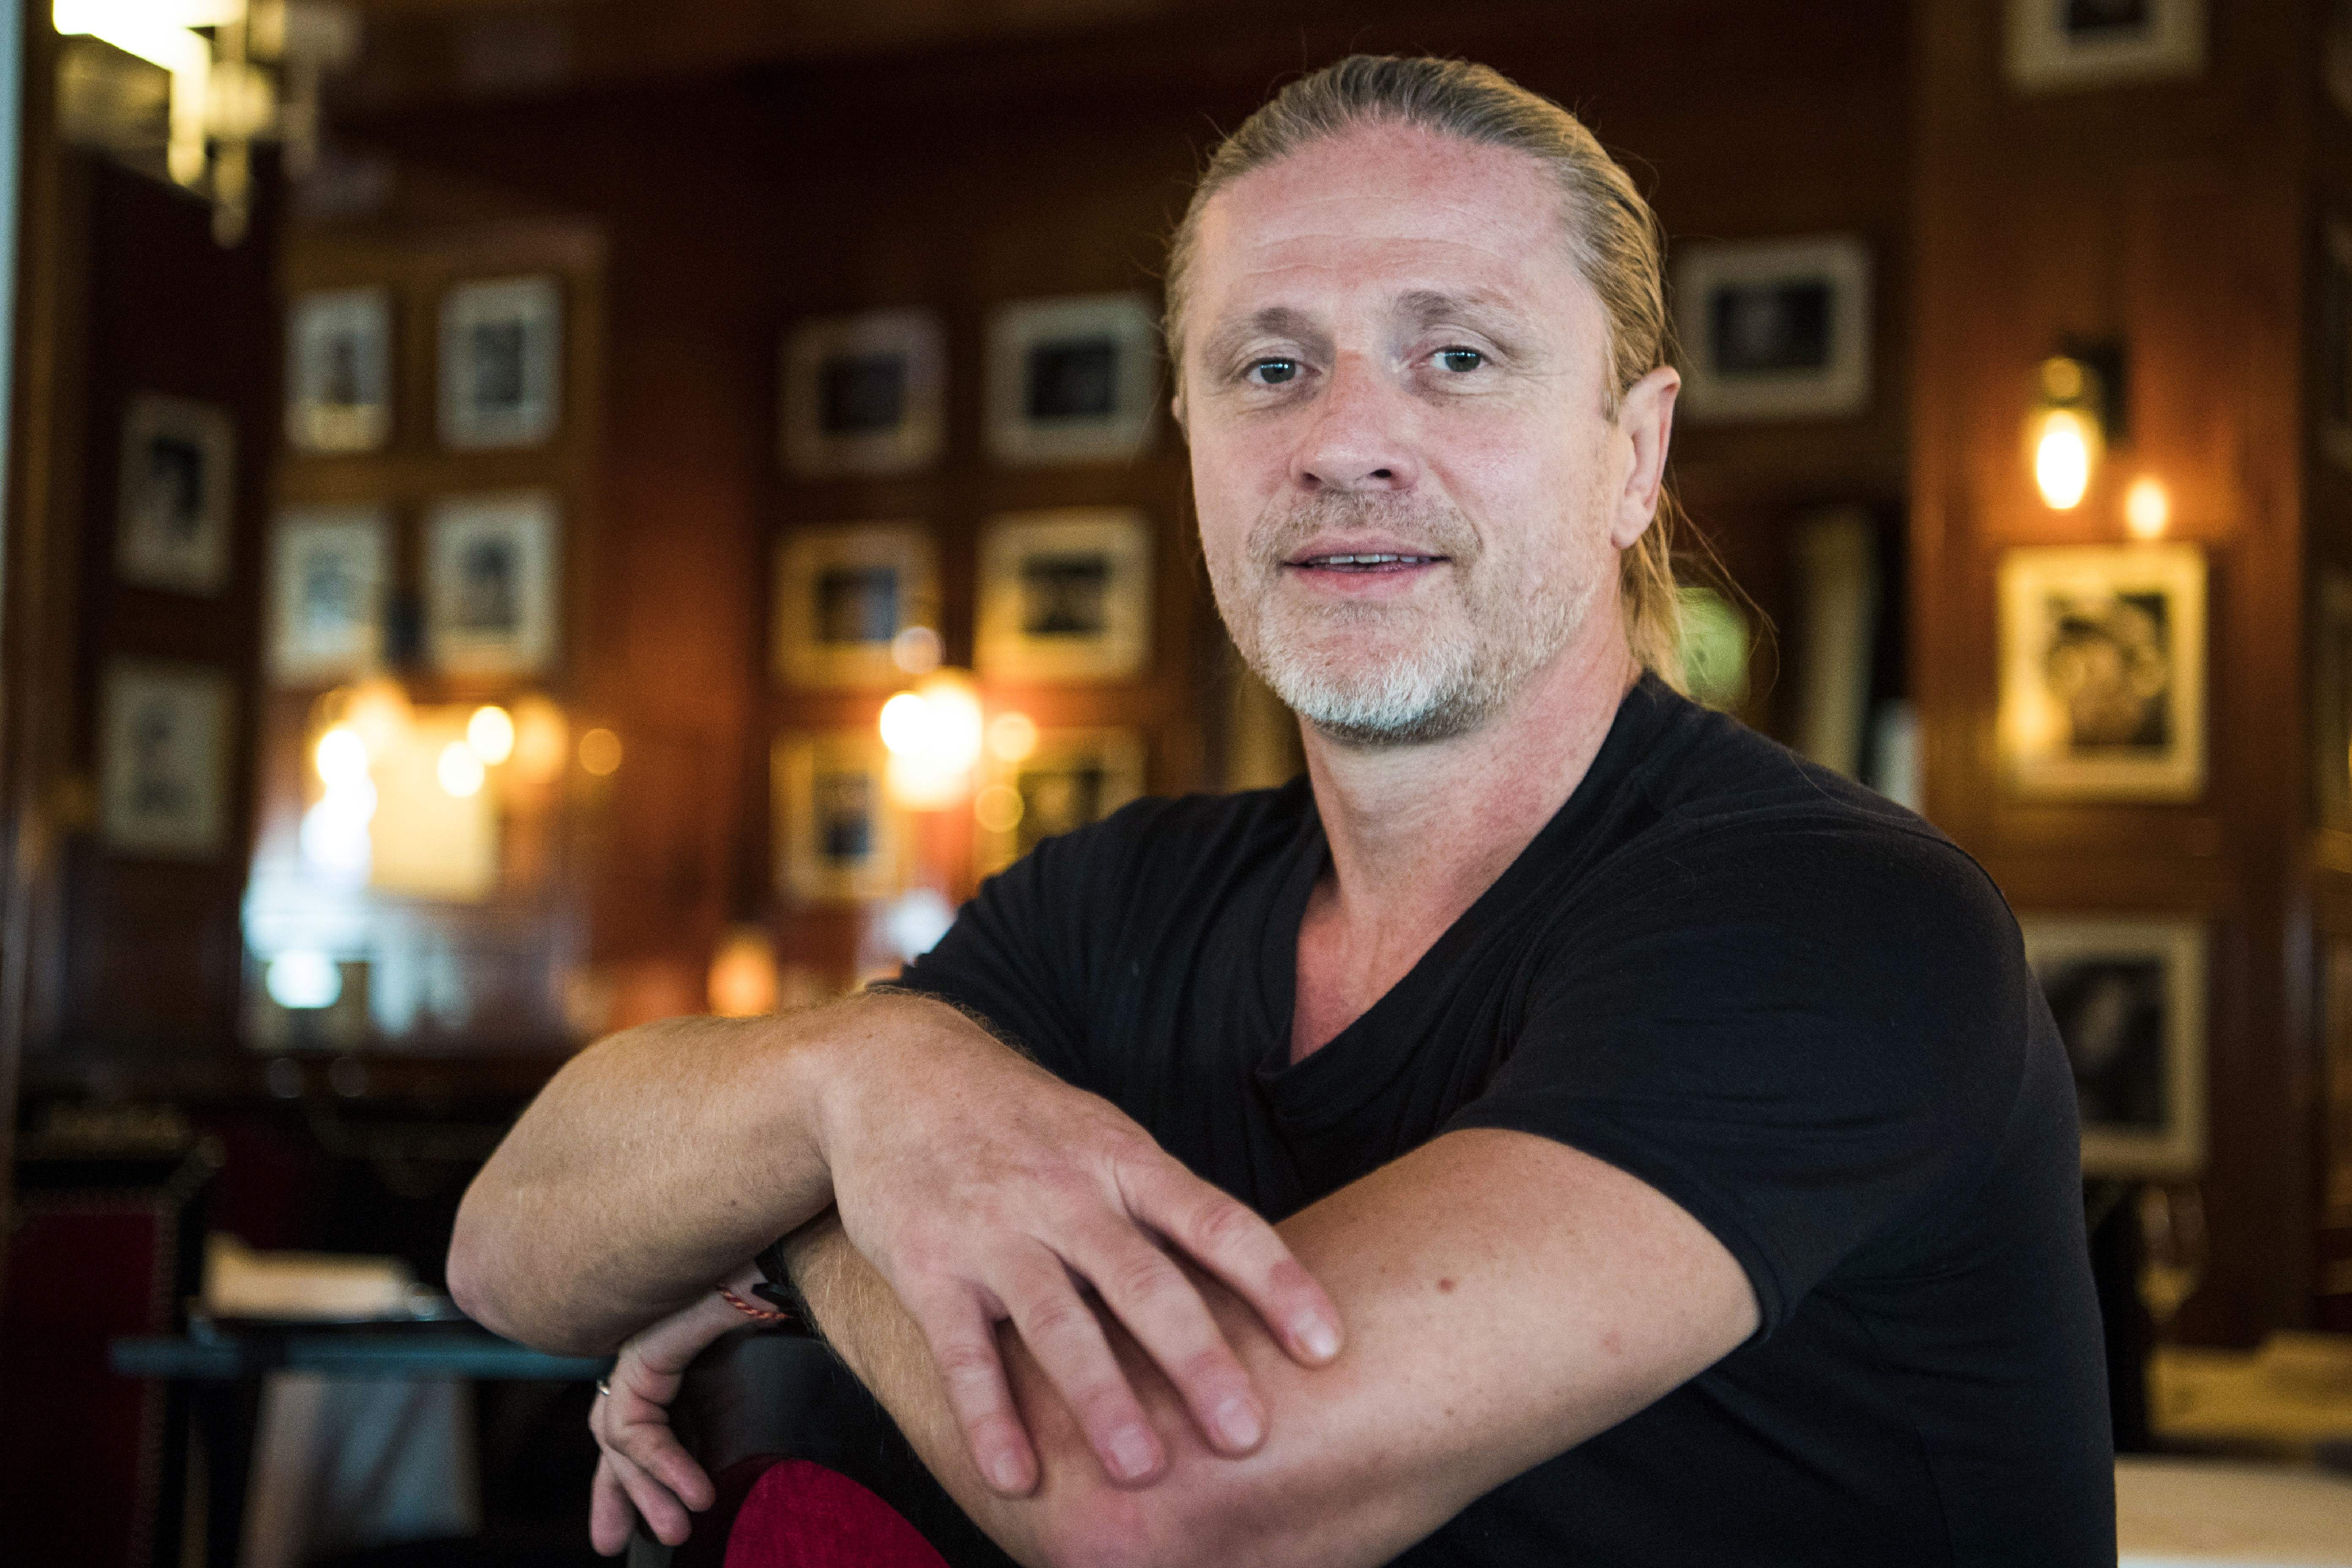 Former French midfielder and 1998 World Champion, Emmanuel Petit poses during a photo session on September 14, 2017 in Paris. 
Challenged Arsenal head coach Arsene Wenger "is still the man of the situation" said Arsenal former player Emmanuel Petit, who regrets "to see that this club no longer attracts top players." / AFP PHOTO / CHRISTOPHE SIMON        (Photo credit should read CHRISTOPHE SIMON/AFP/Getty Images)